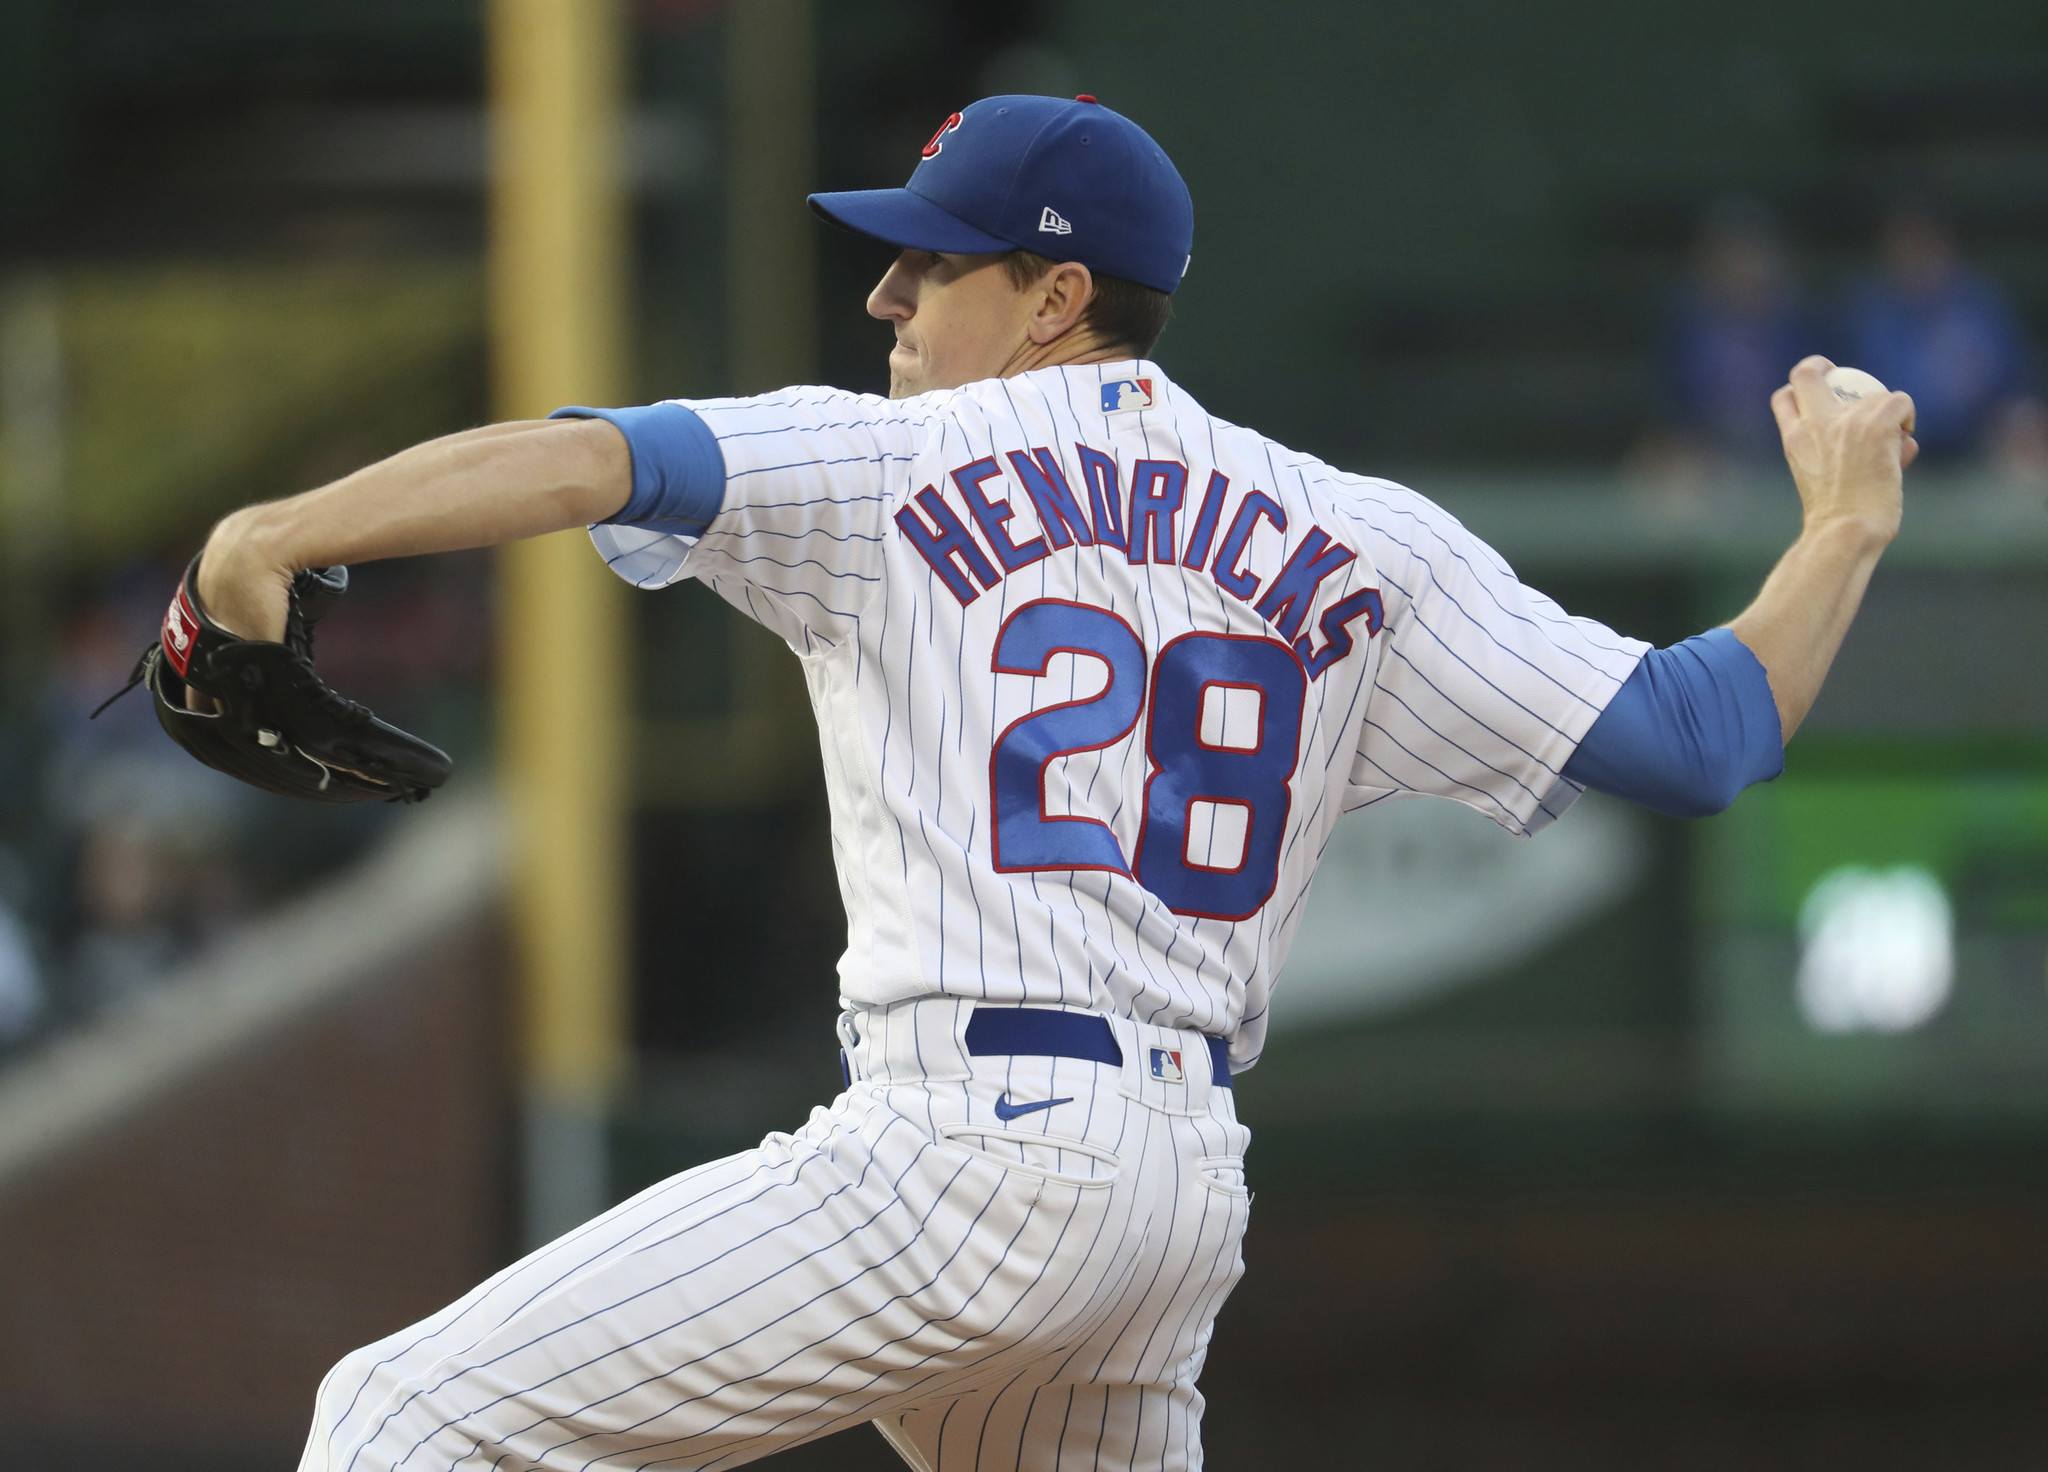 If your son were a multimillionaire pitcher, would you work side jobs? Kyle  Hendricks' dad does